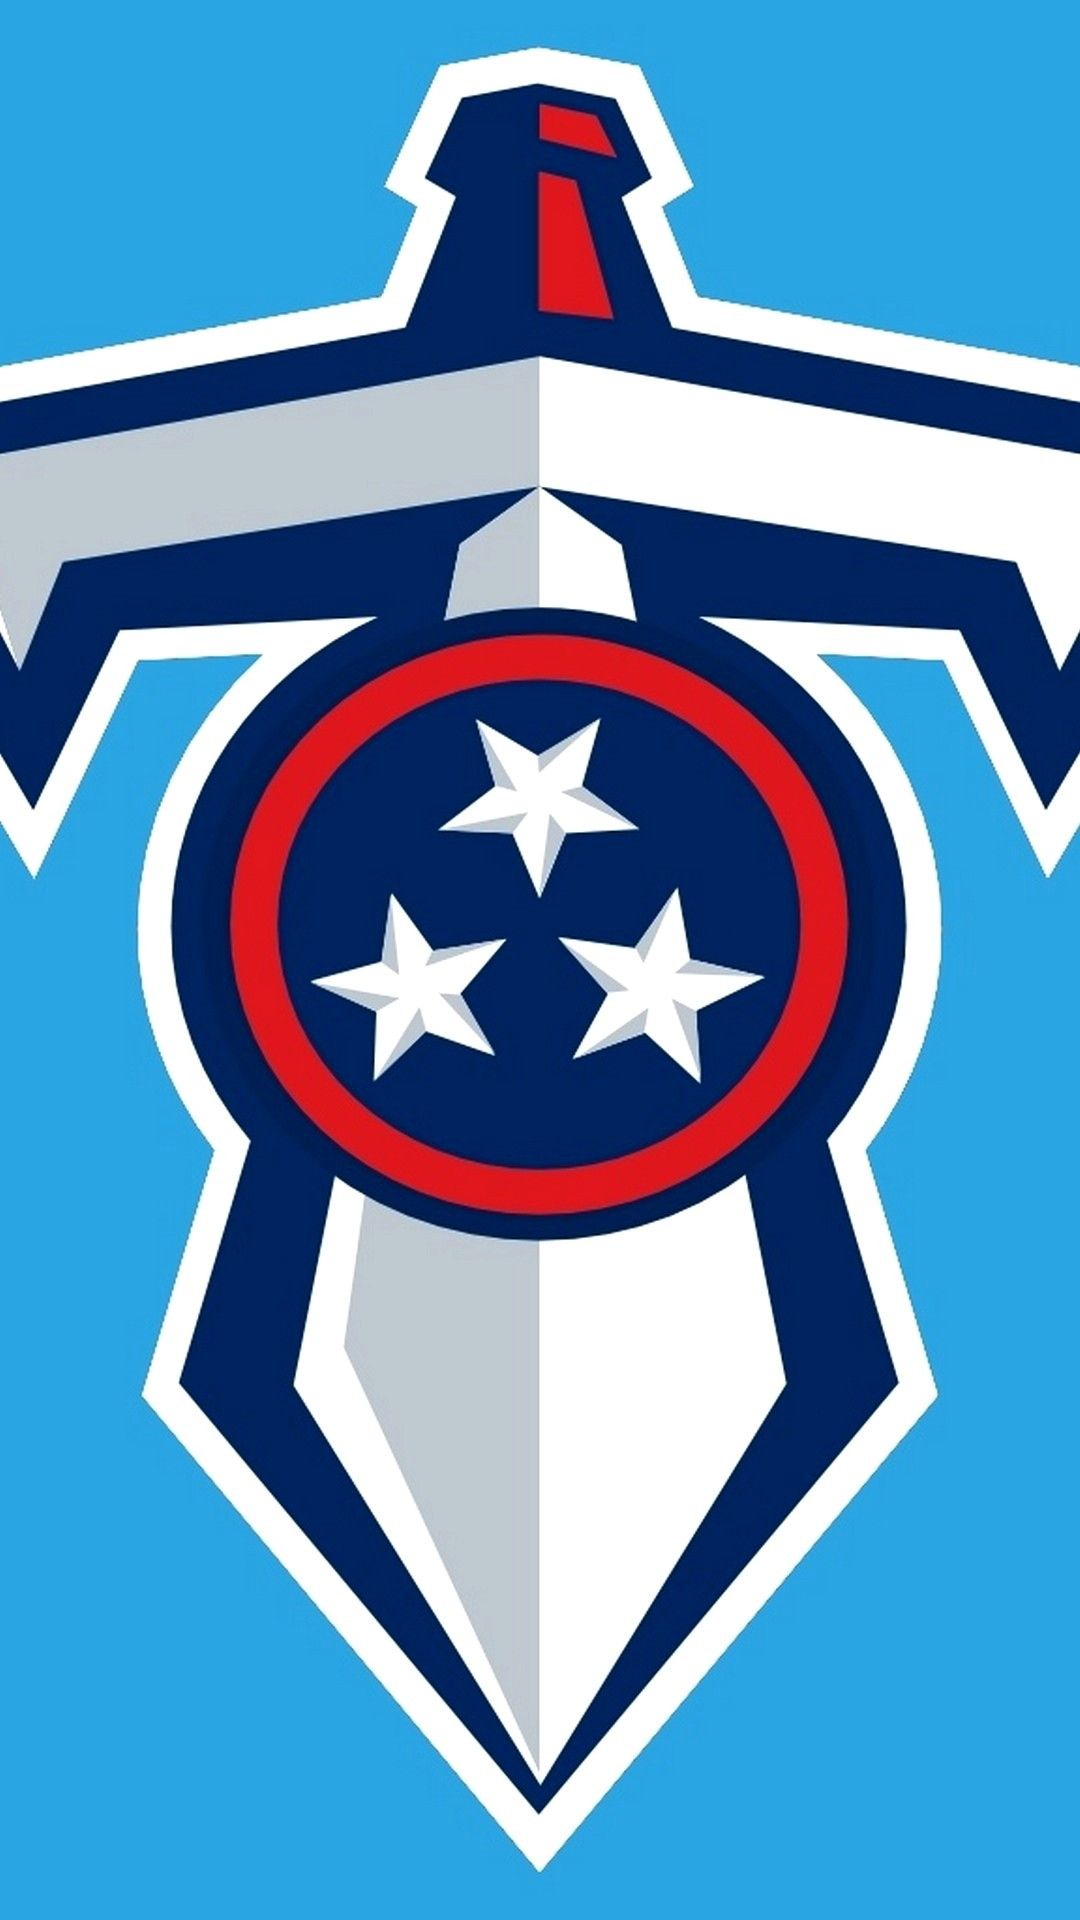 The logo for tennessee titans is shown - Texas